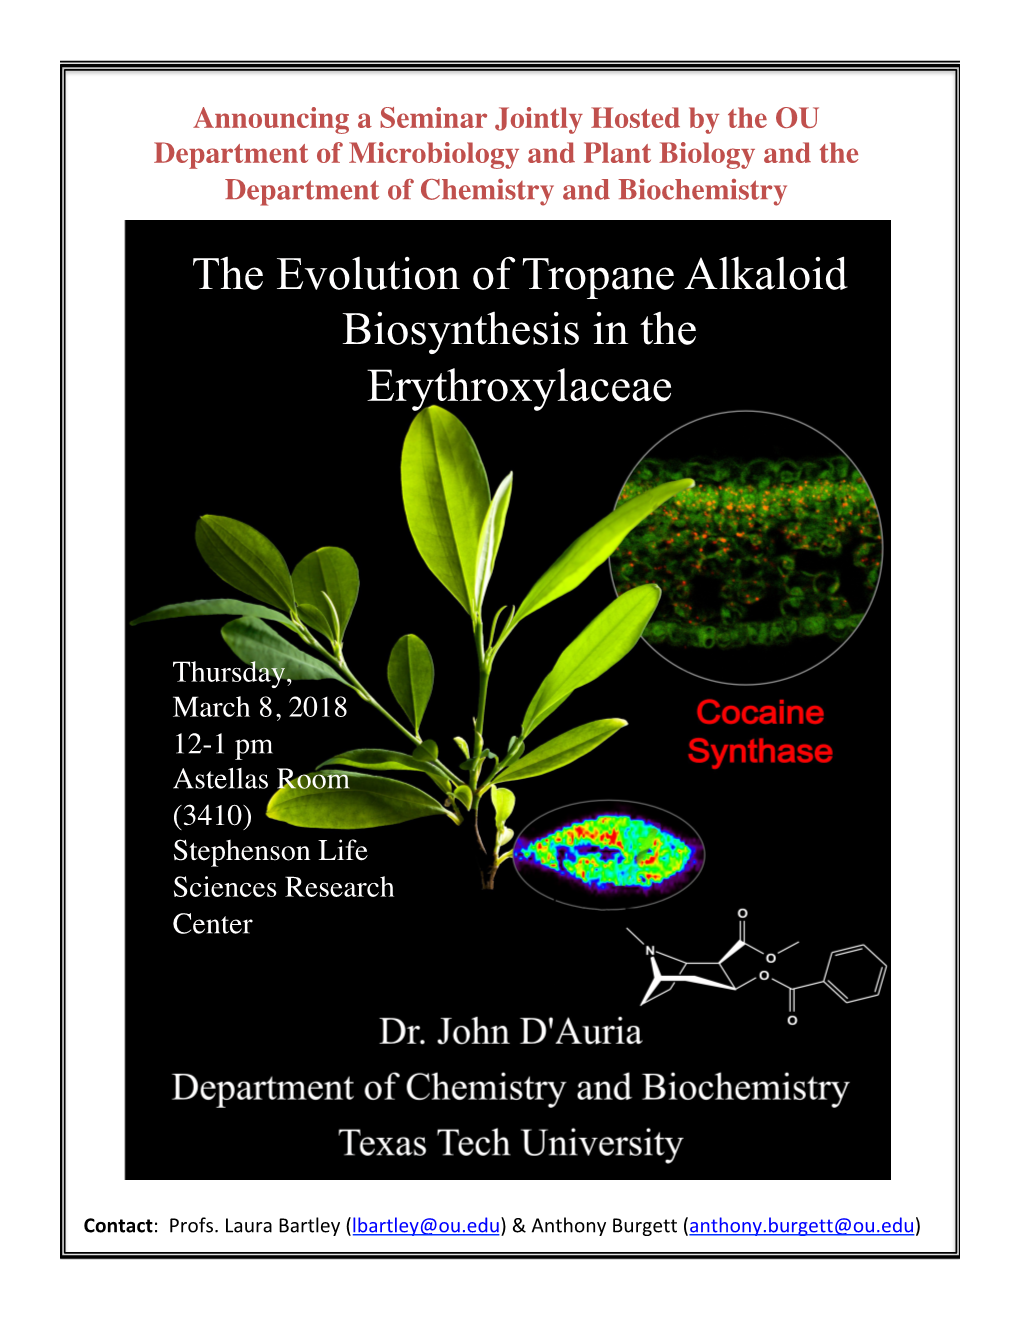 The Evolution of Tropane Alkaloid Biosynthesis in the Erythroxylaceae